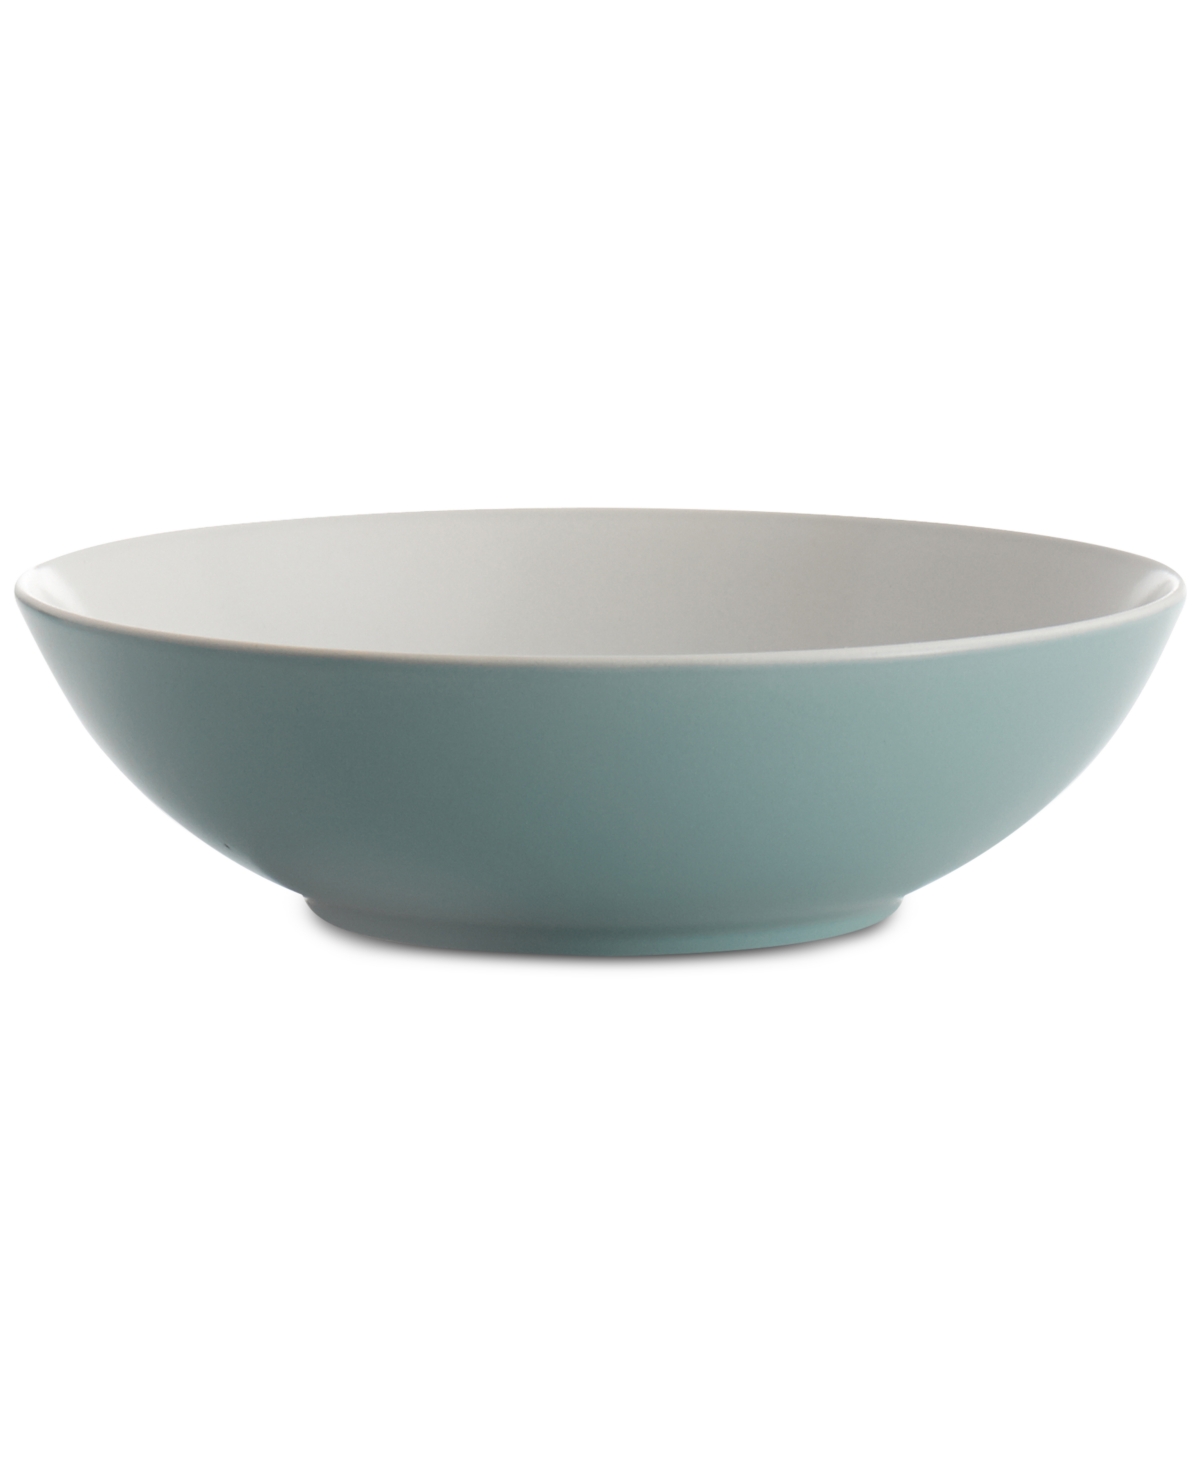 Pop Collection by Robin Levien Soup/Cereal Bowl - Slate